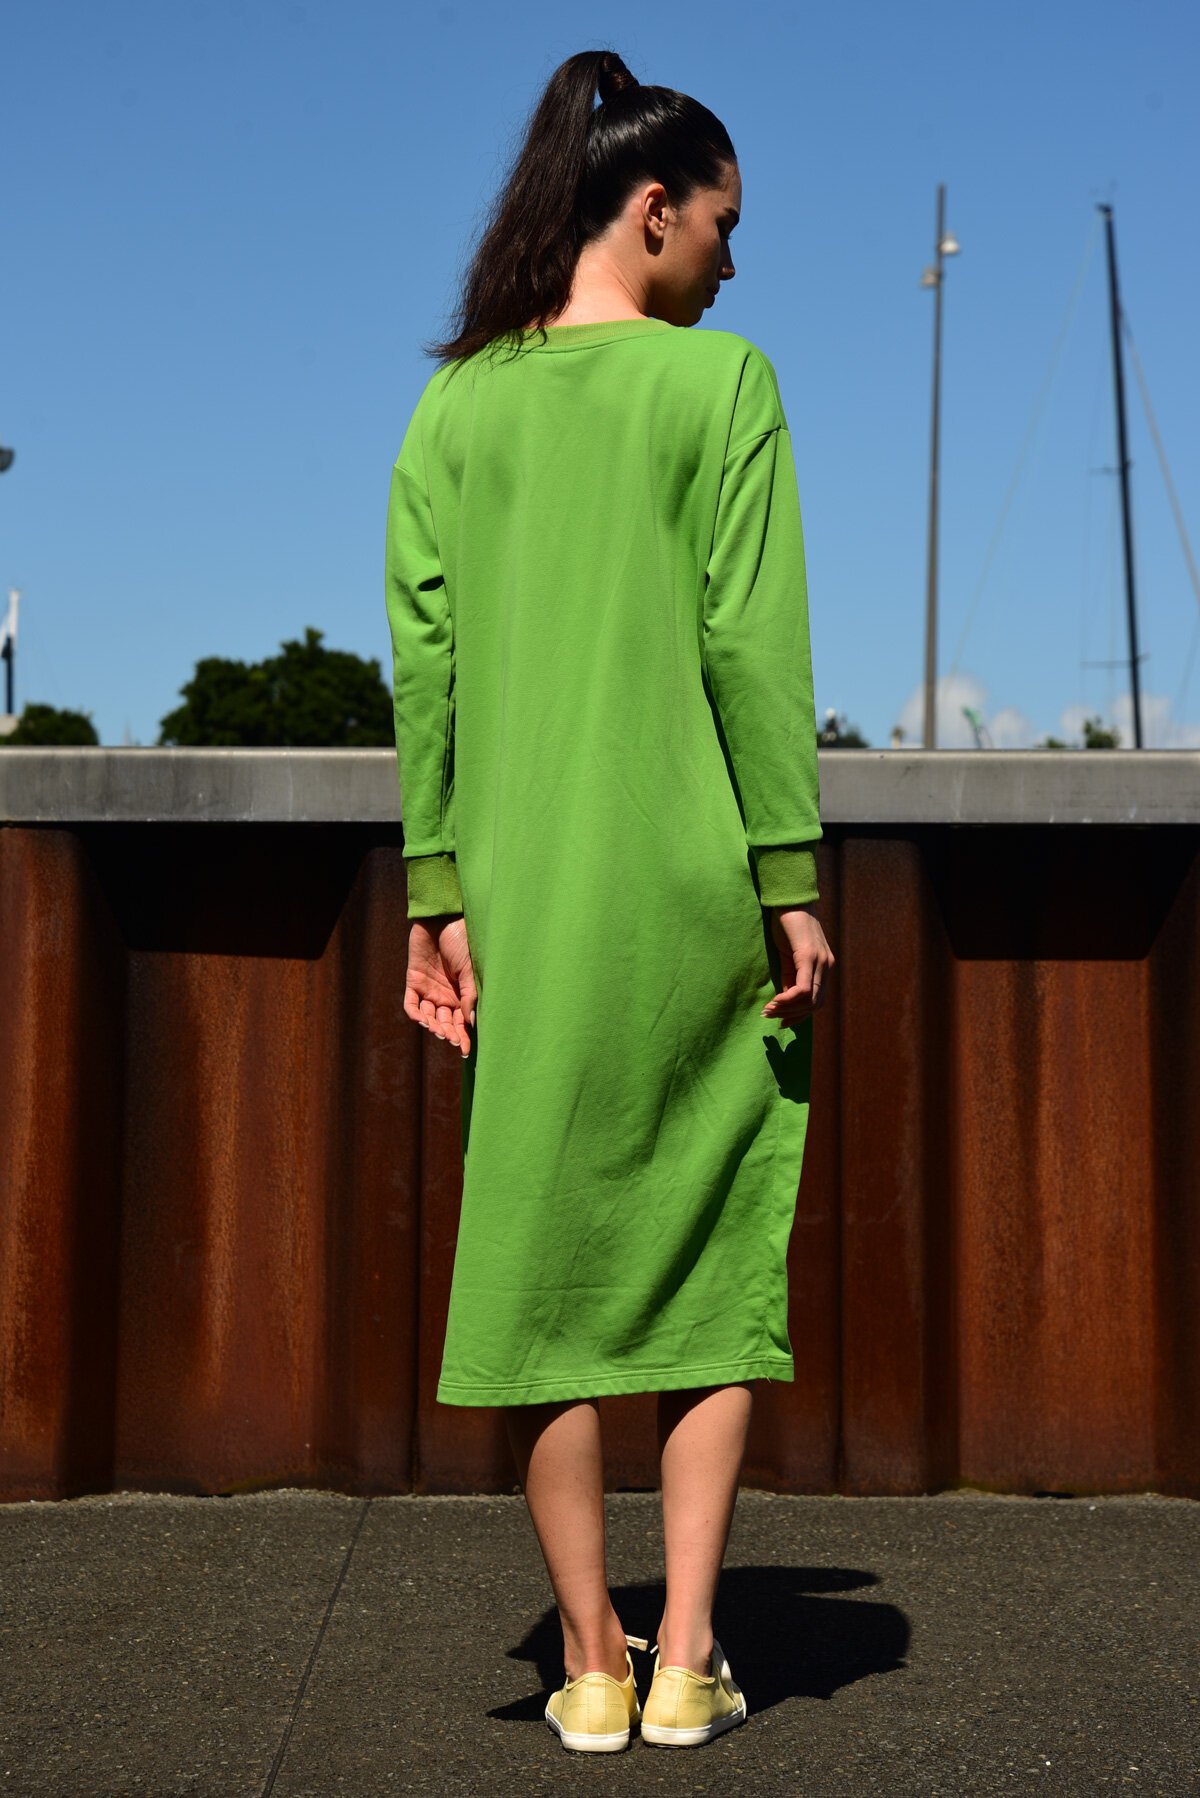 EASY STREET Dress - Curate : Trelise Cooper Online - THE THICK OF IT ...